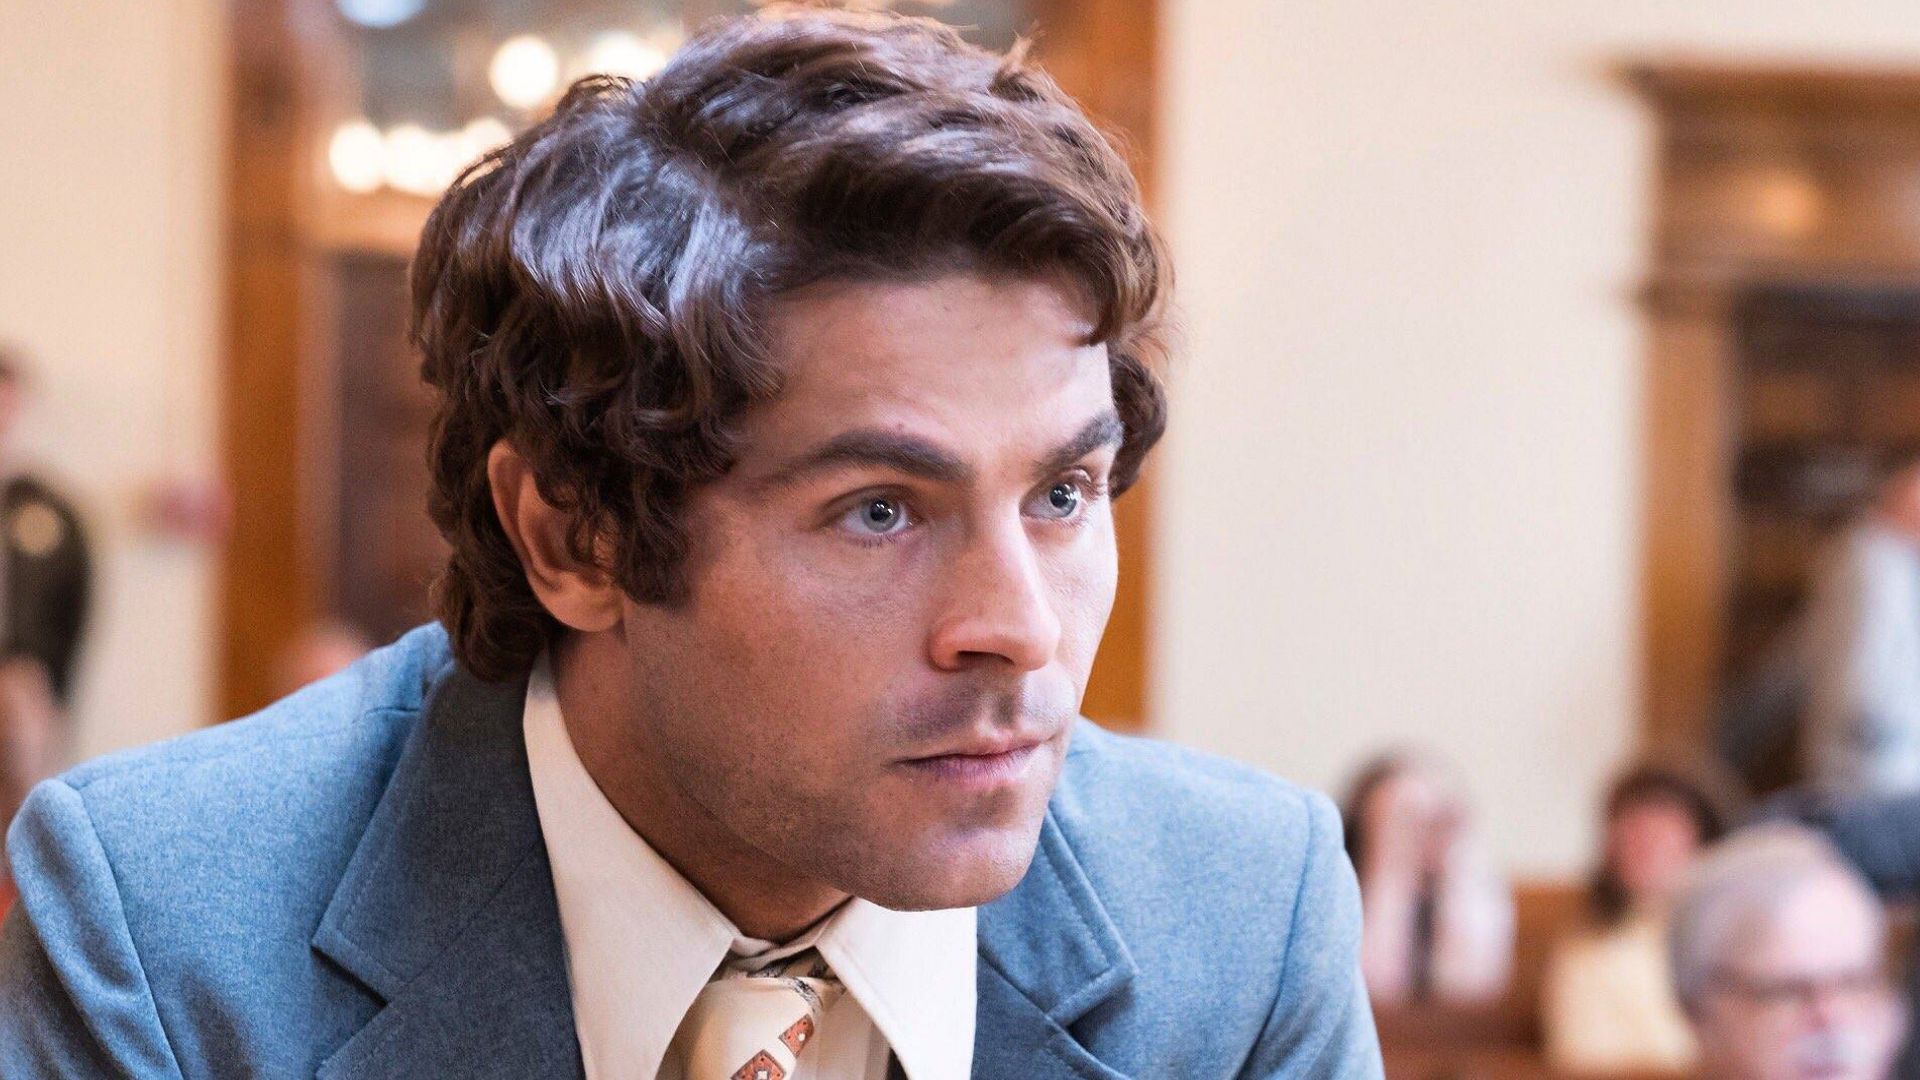 zac efron ted bundy nel primo trailer extremely wicked shockingly evil and vile v5 361510